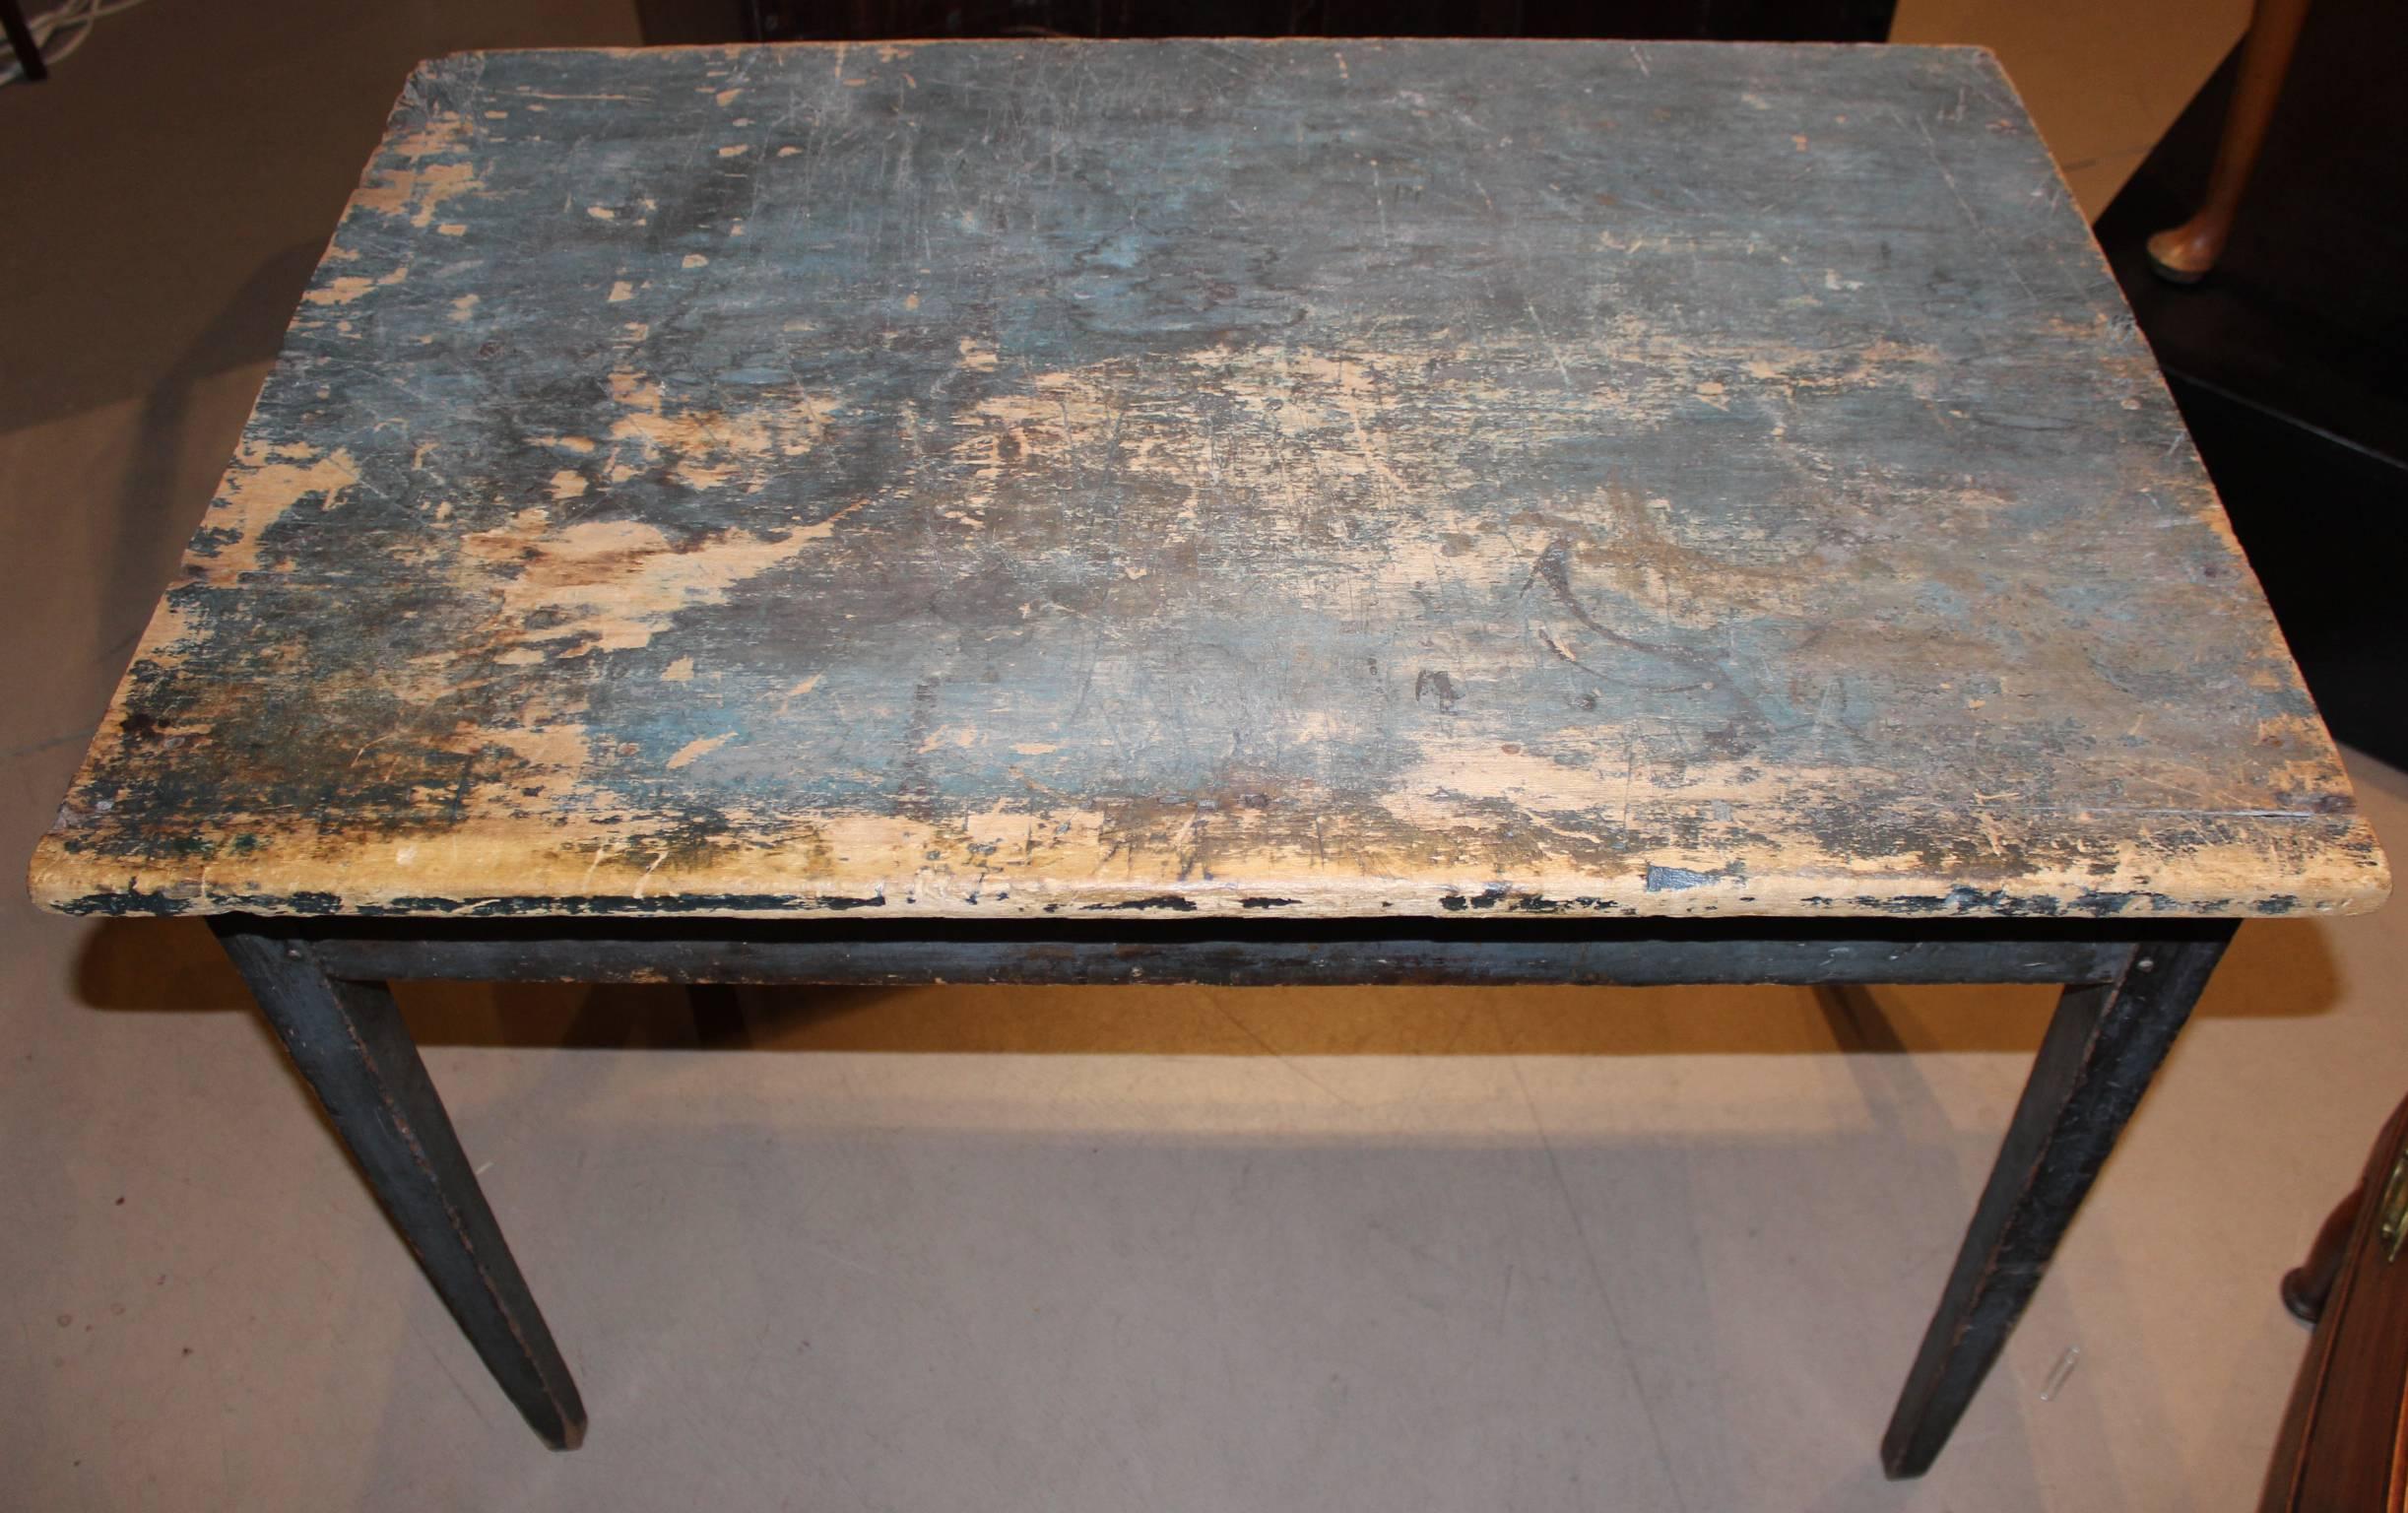 This early American pine work table circa 1820 in old blue paint has a great worn surface and nice Primitive look with patches of paint loss, discoloring in spots, and overall expected surface wear from age and use. The underside appears unpainted.